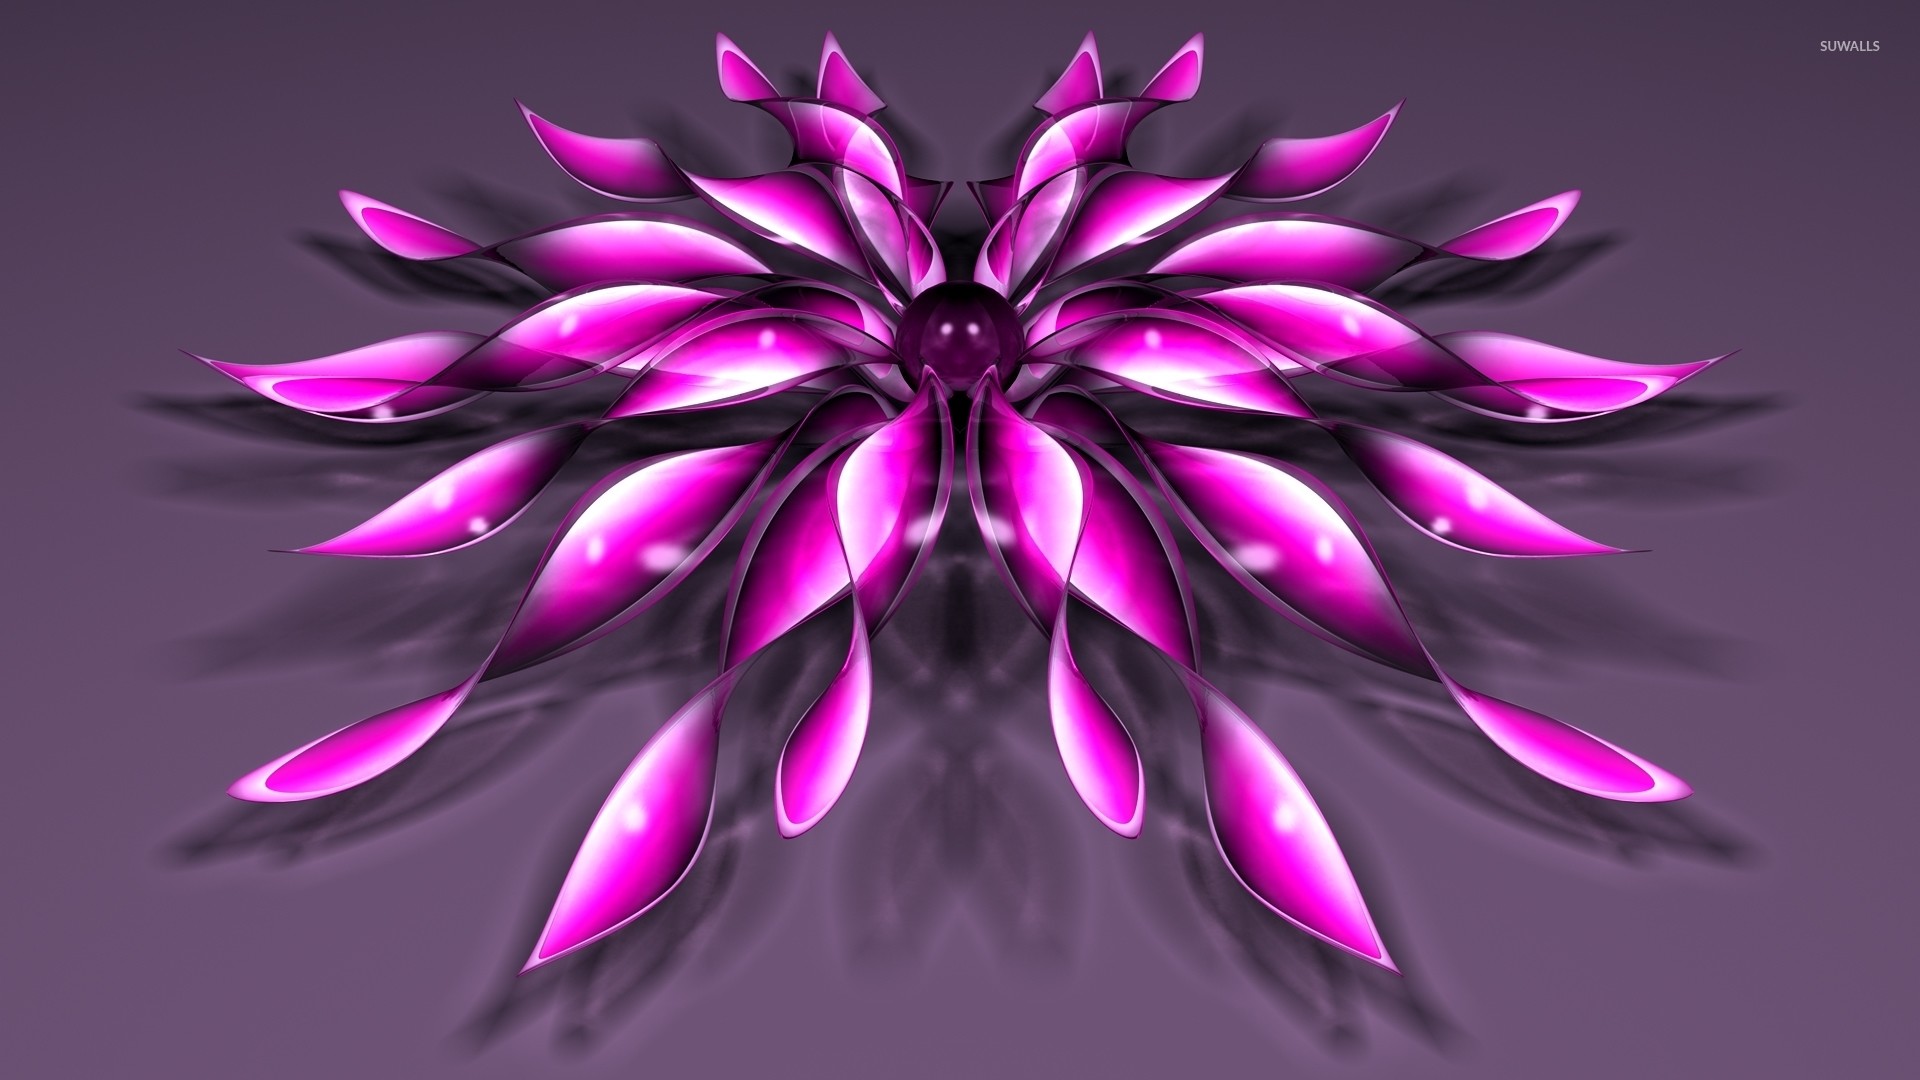 1920x1080 Pink flowers with a purple core wallpaper  jpg